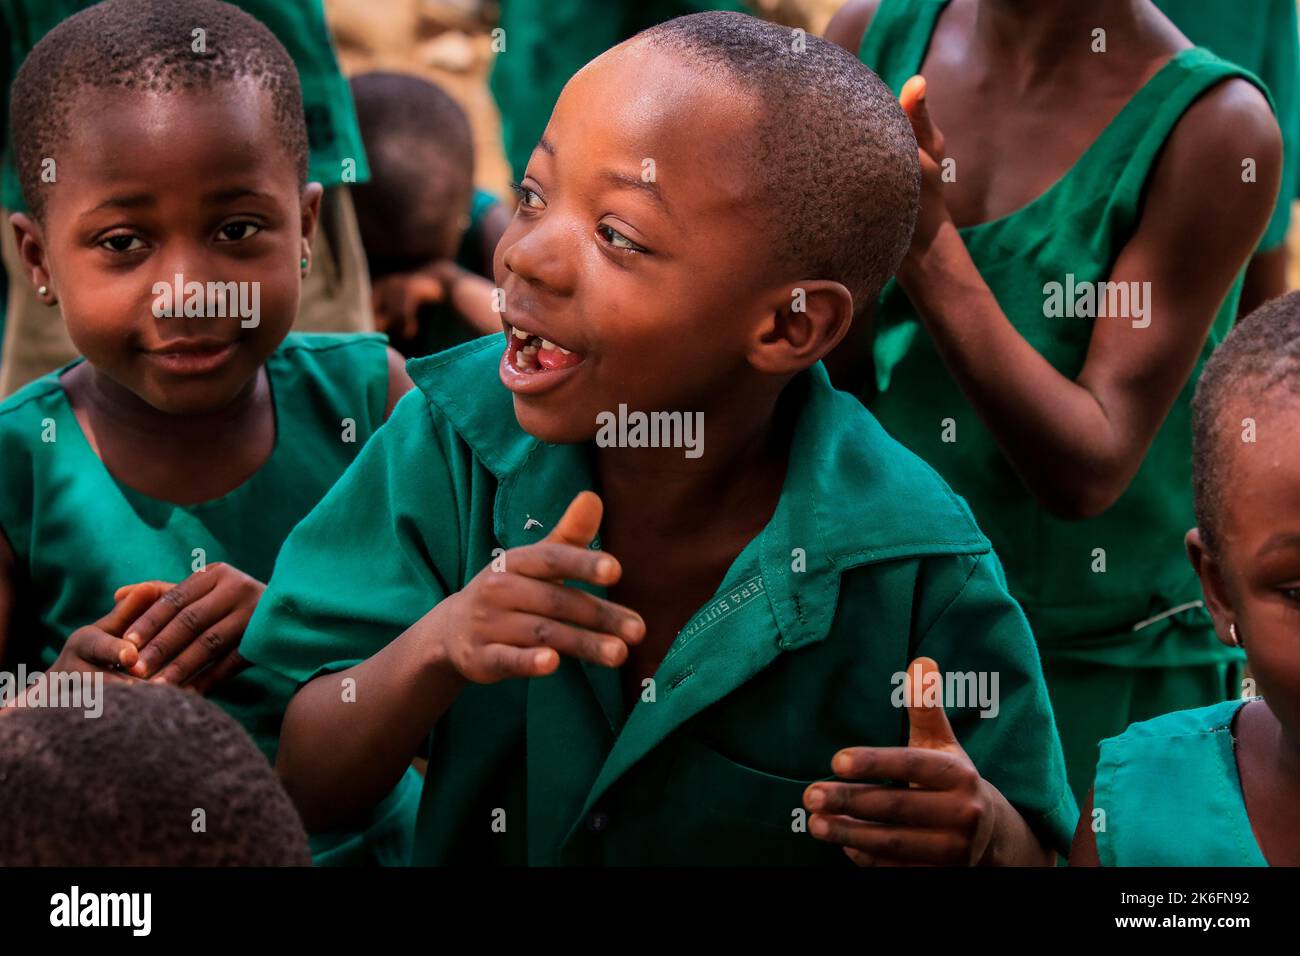 Amedzofe, Ghana - April 07, 2022: African Pupils in Colorful School Uniform near the small Ghana Amedzofe town Stock Photo